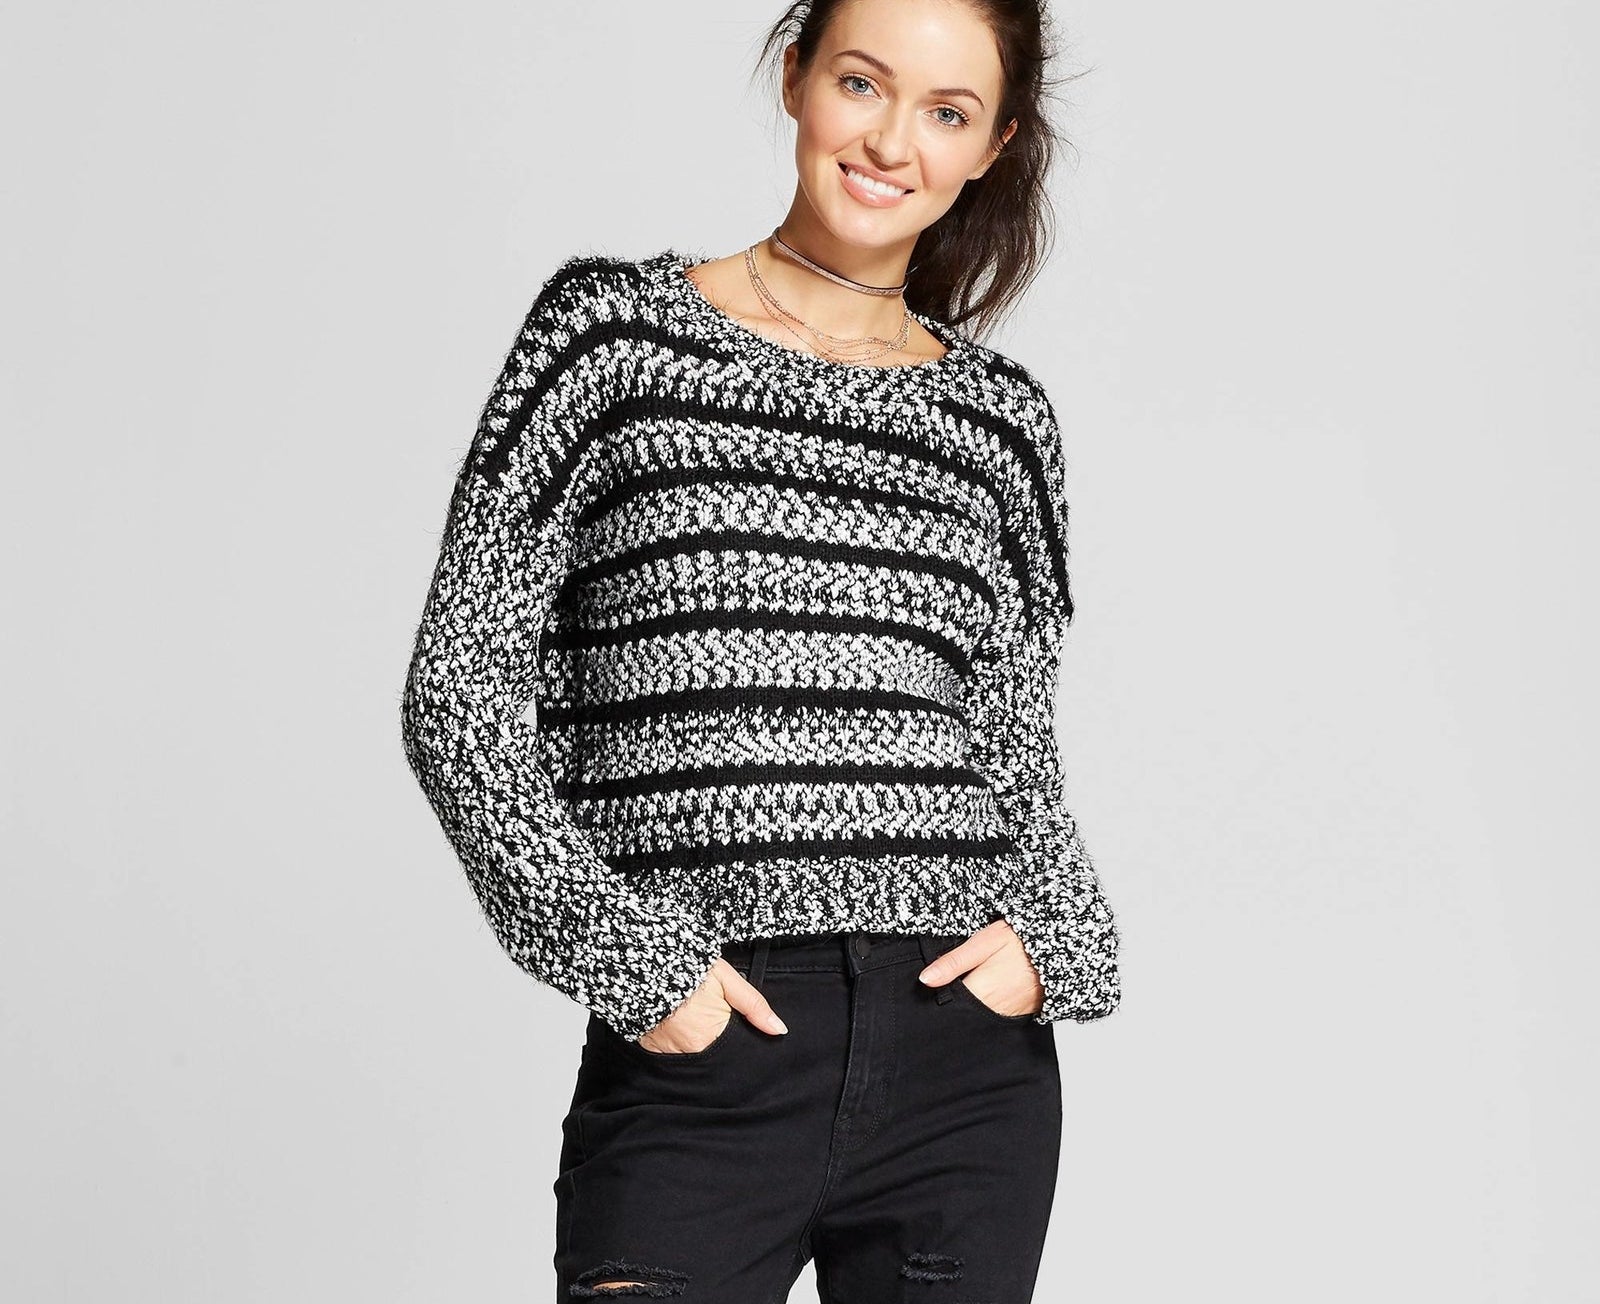 36 Sweaters That'll Make Your Winter Wardrobe More Interesting